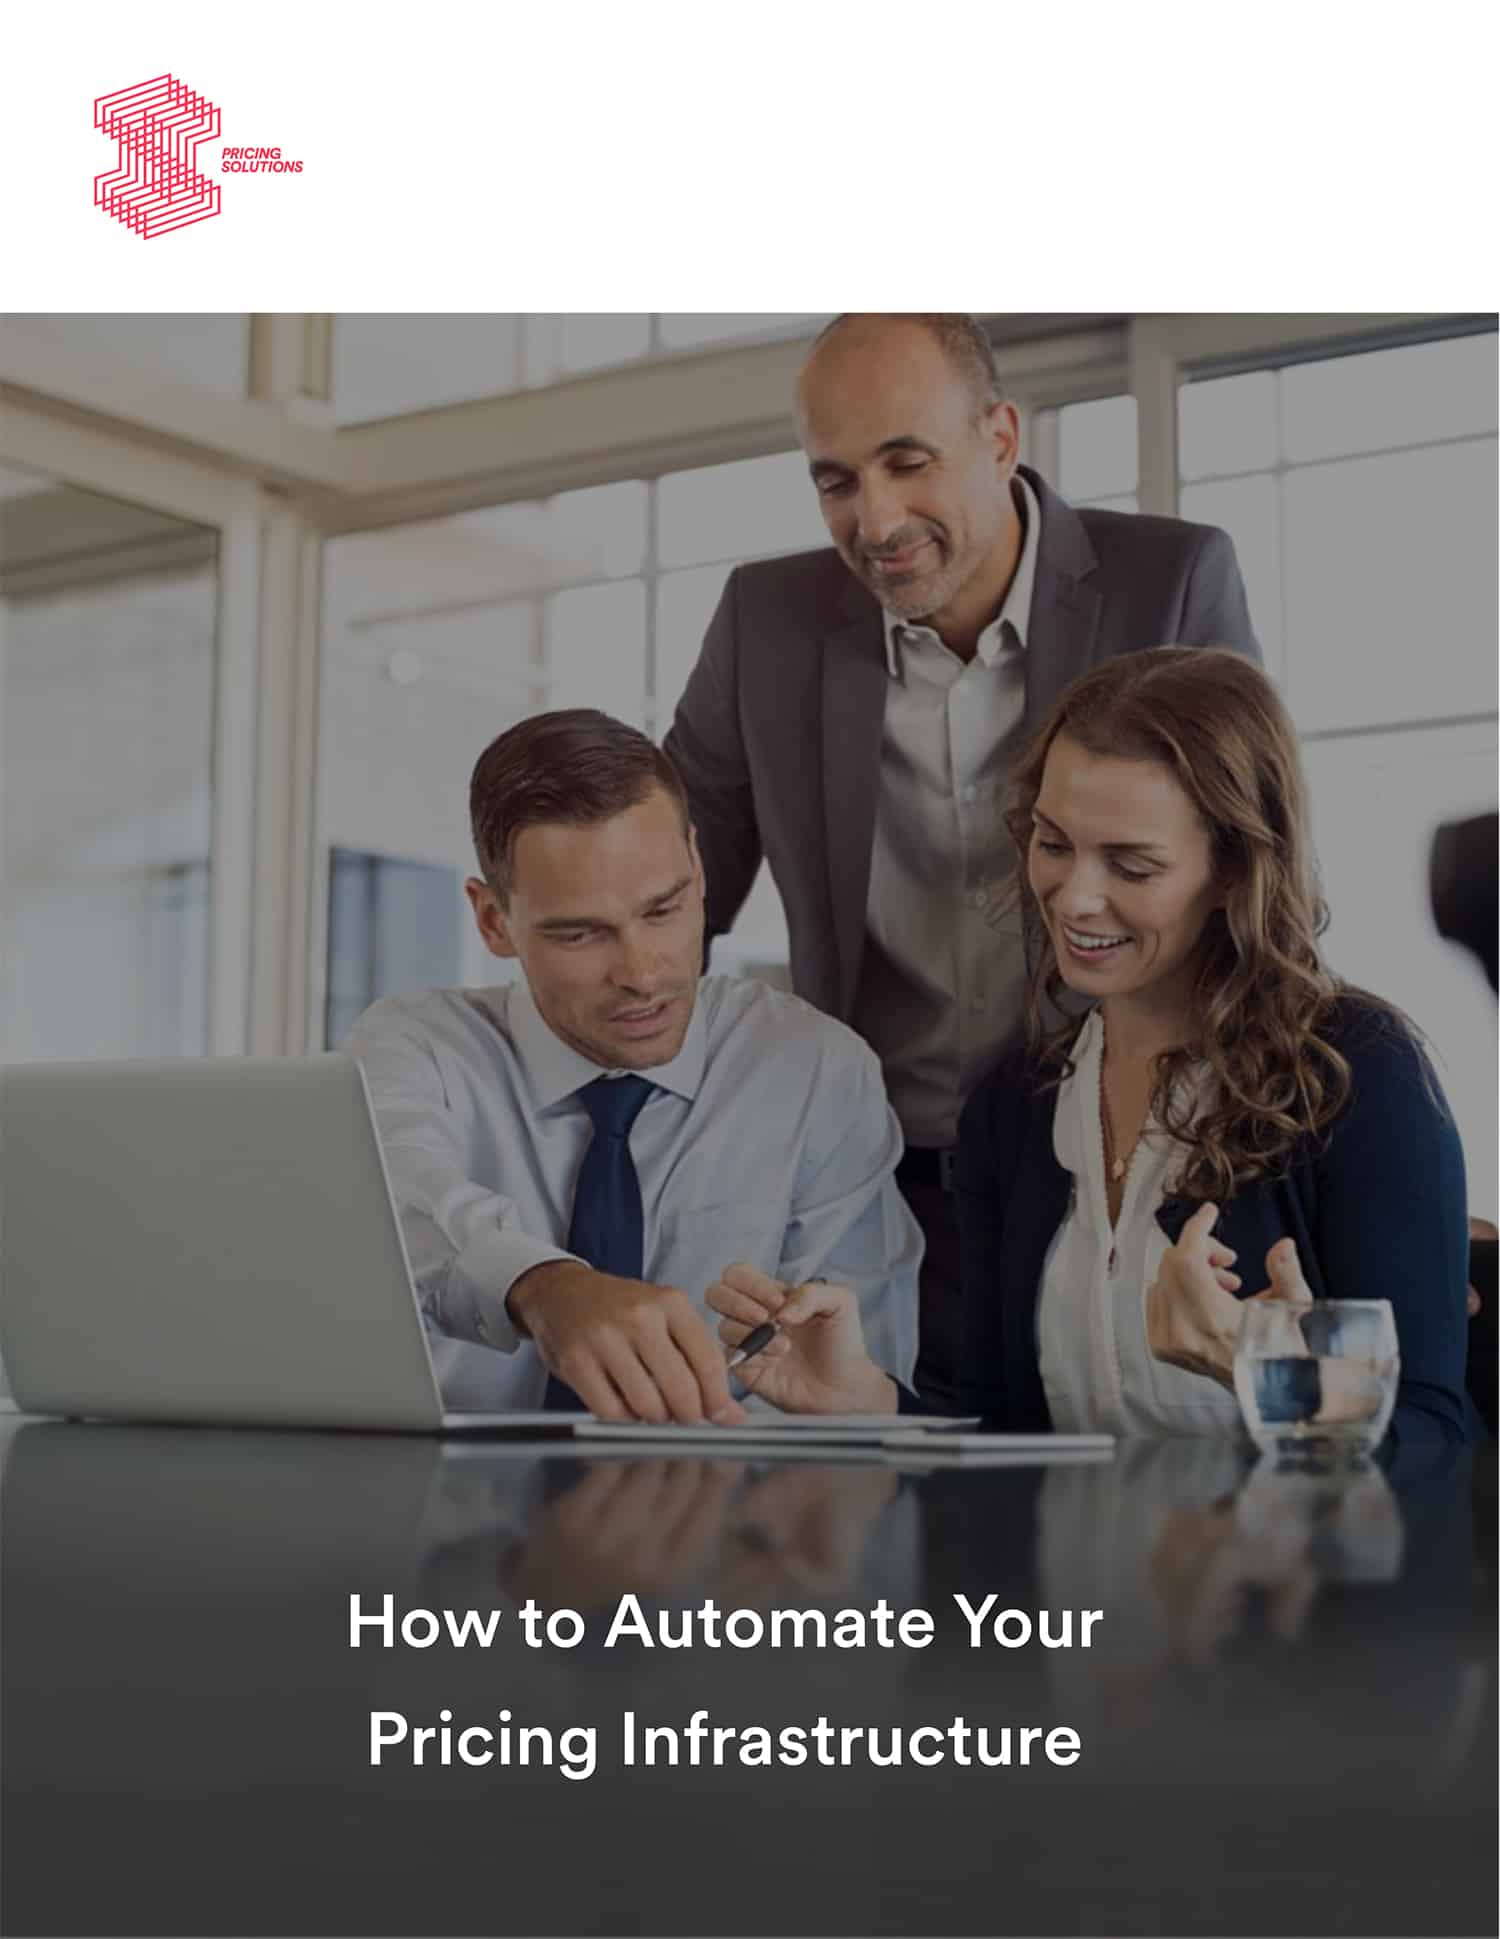 How to Automate your Pricing Infrastructure